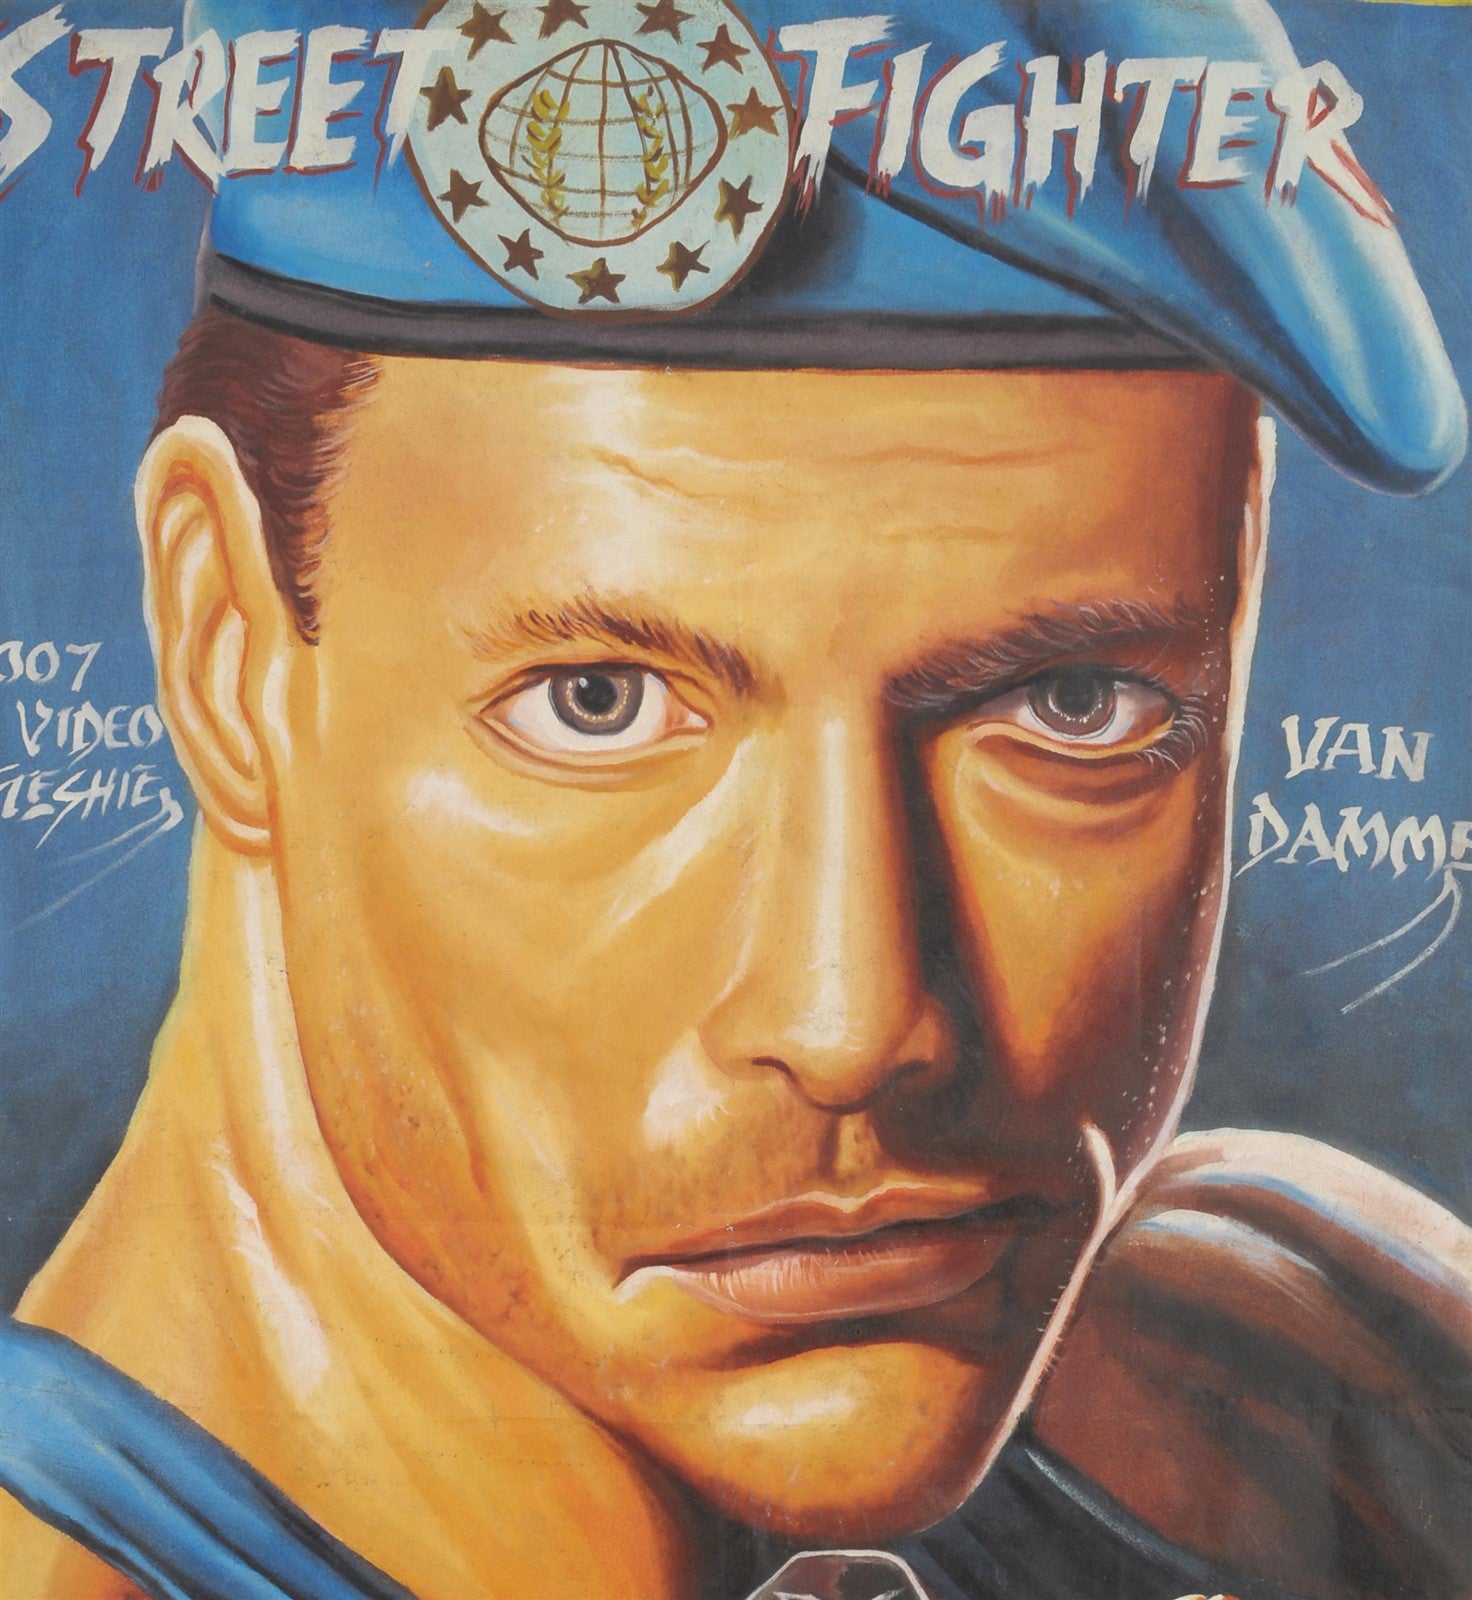 STREET FIGHTER MOVIE POSTER HAND PAINTED IN GHANA FOR THE LOCAL CINEMA DETAILS